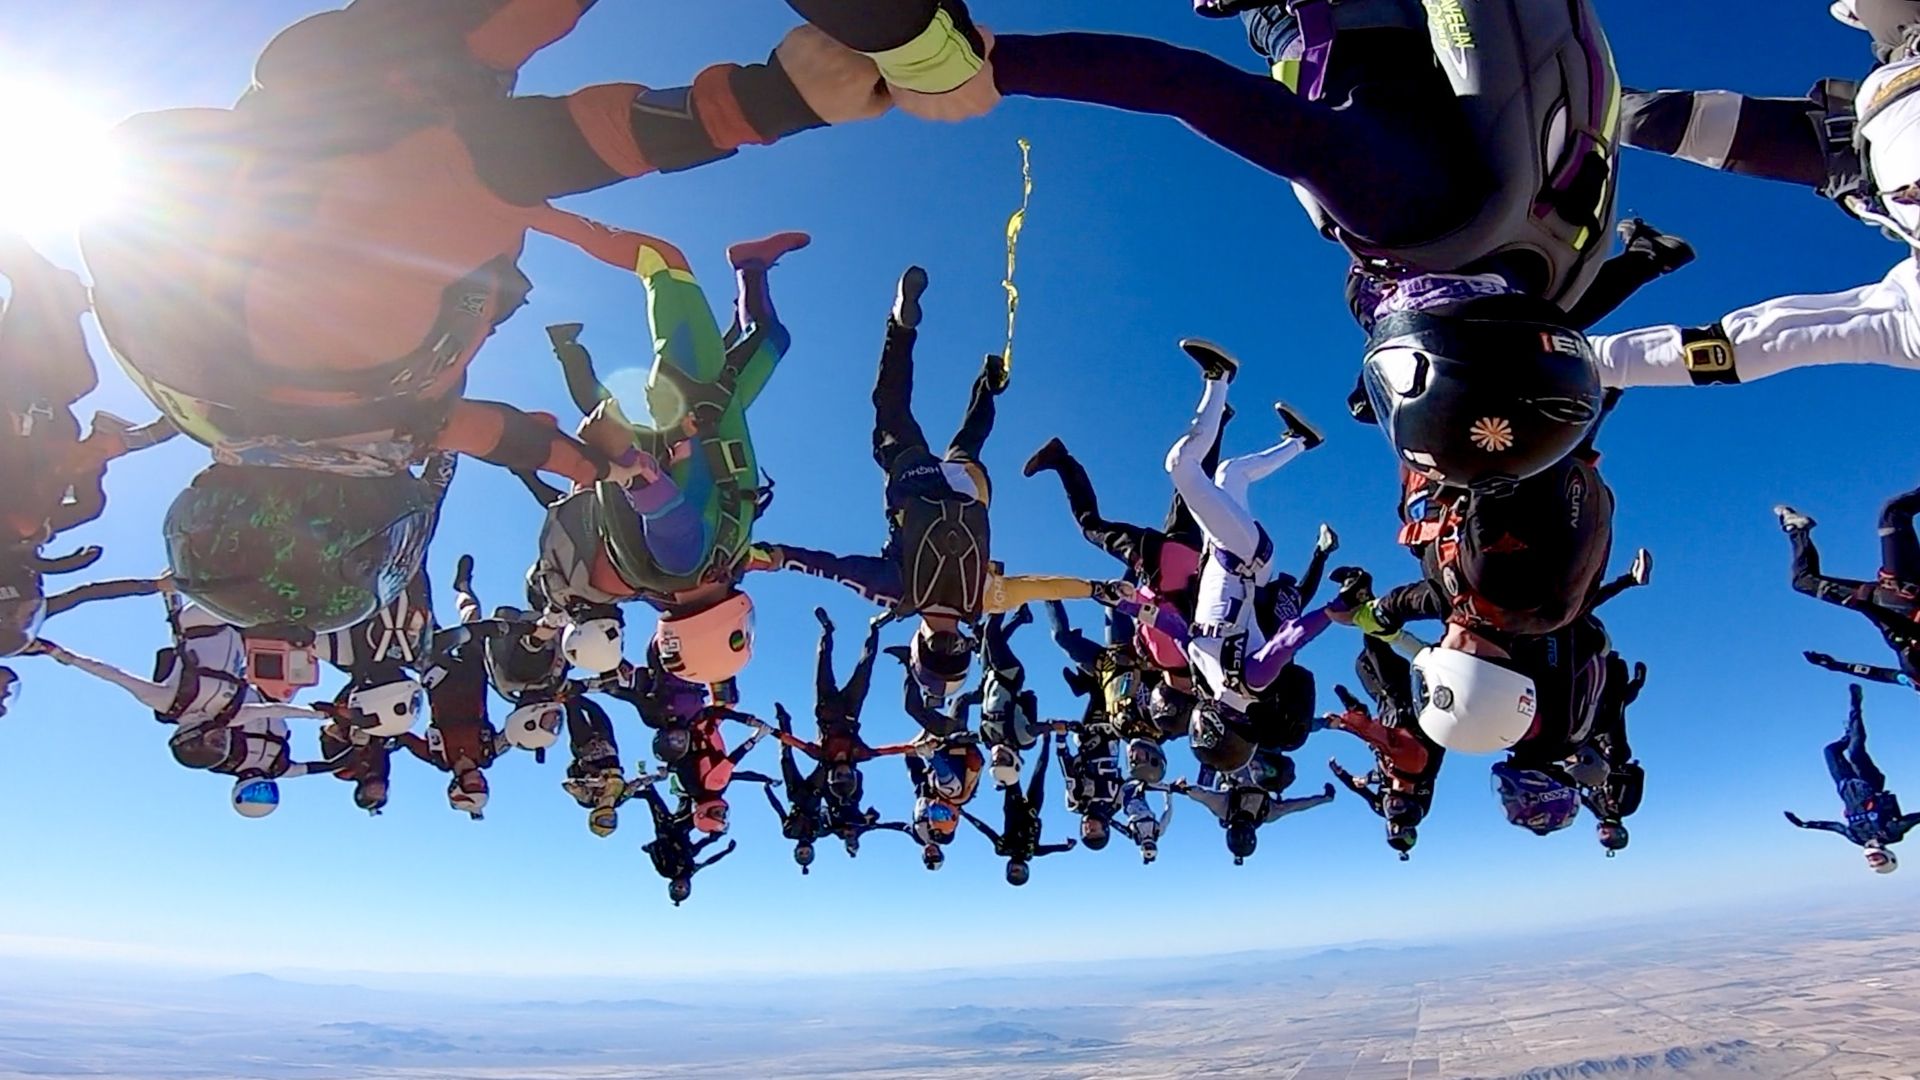 Dozens of skydivers  linking arms while upside down. 